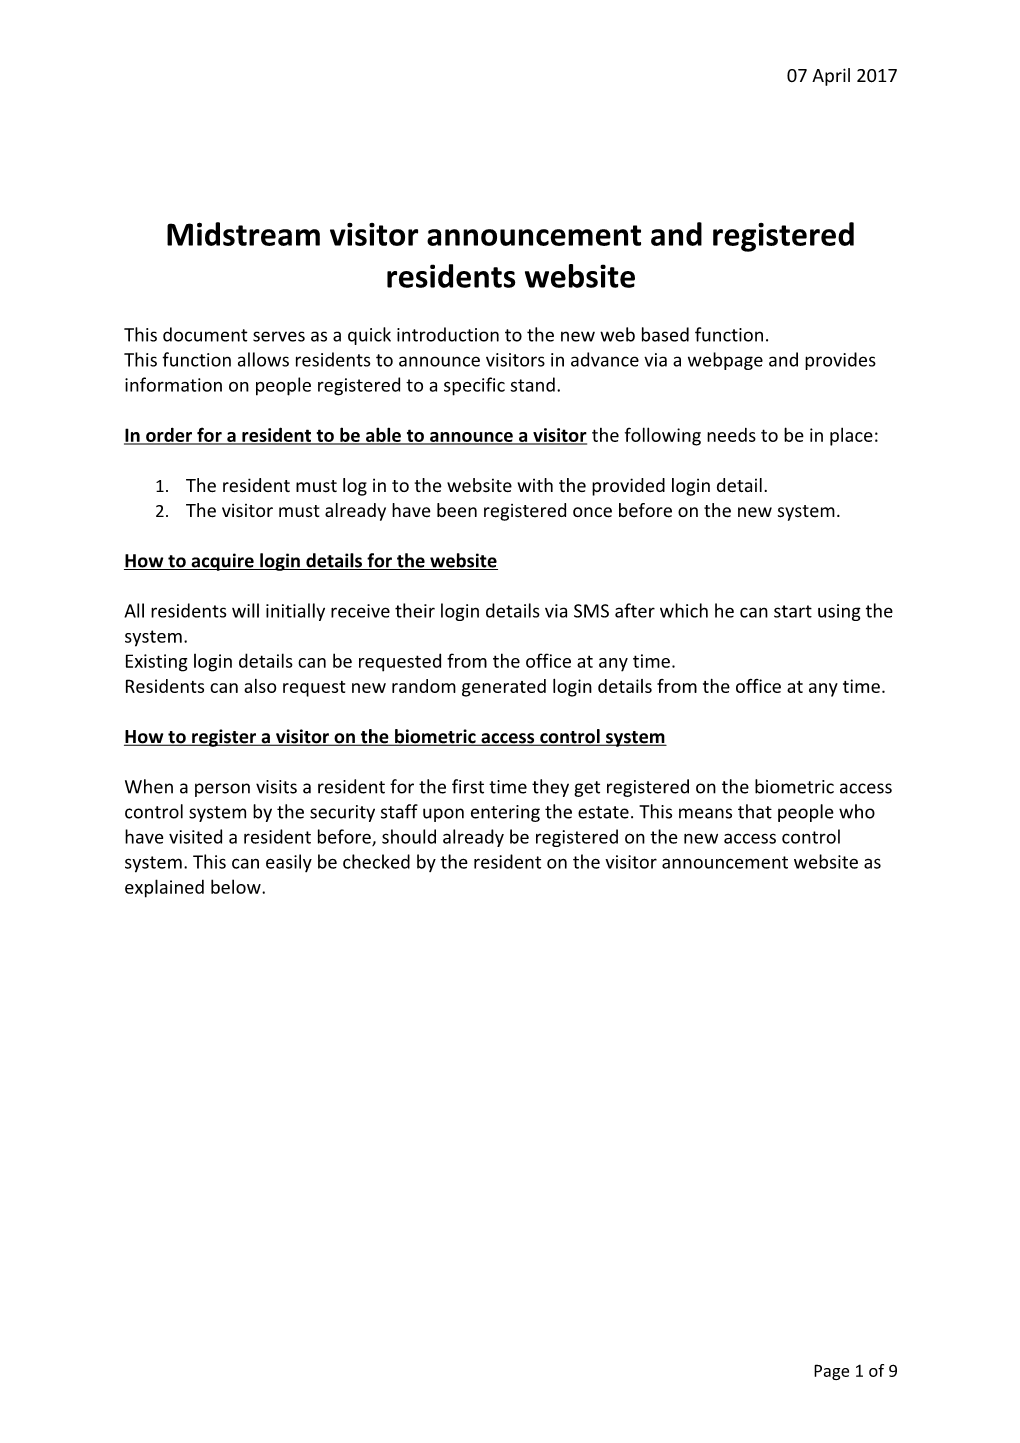 Midstream Visitor Announcement and Registered Residentswebsite